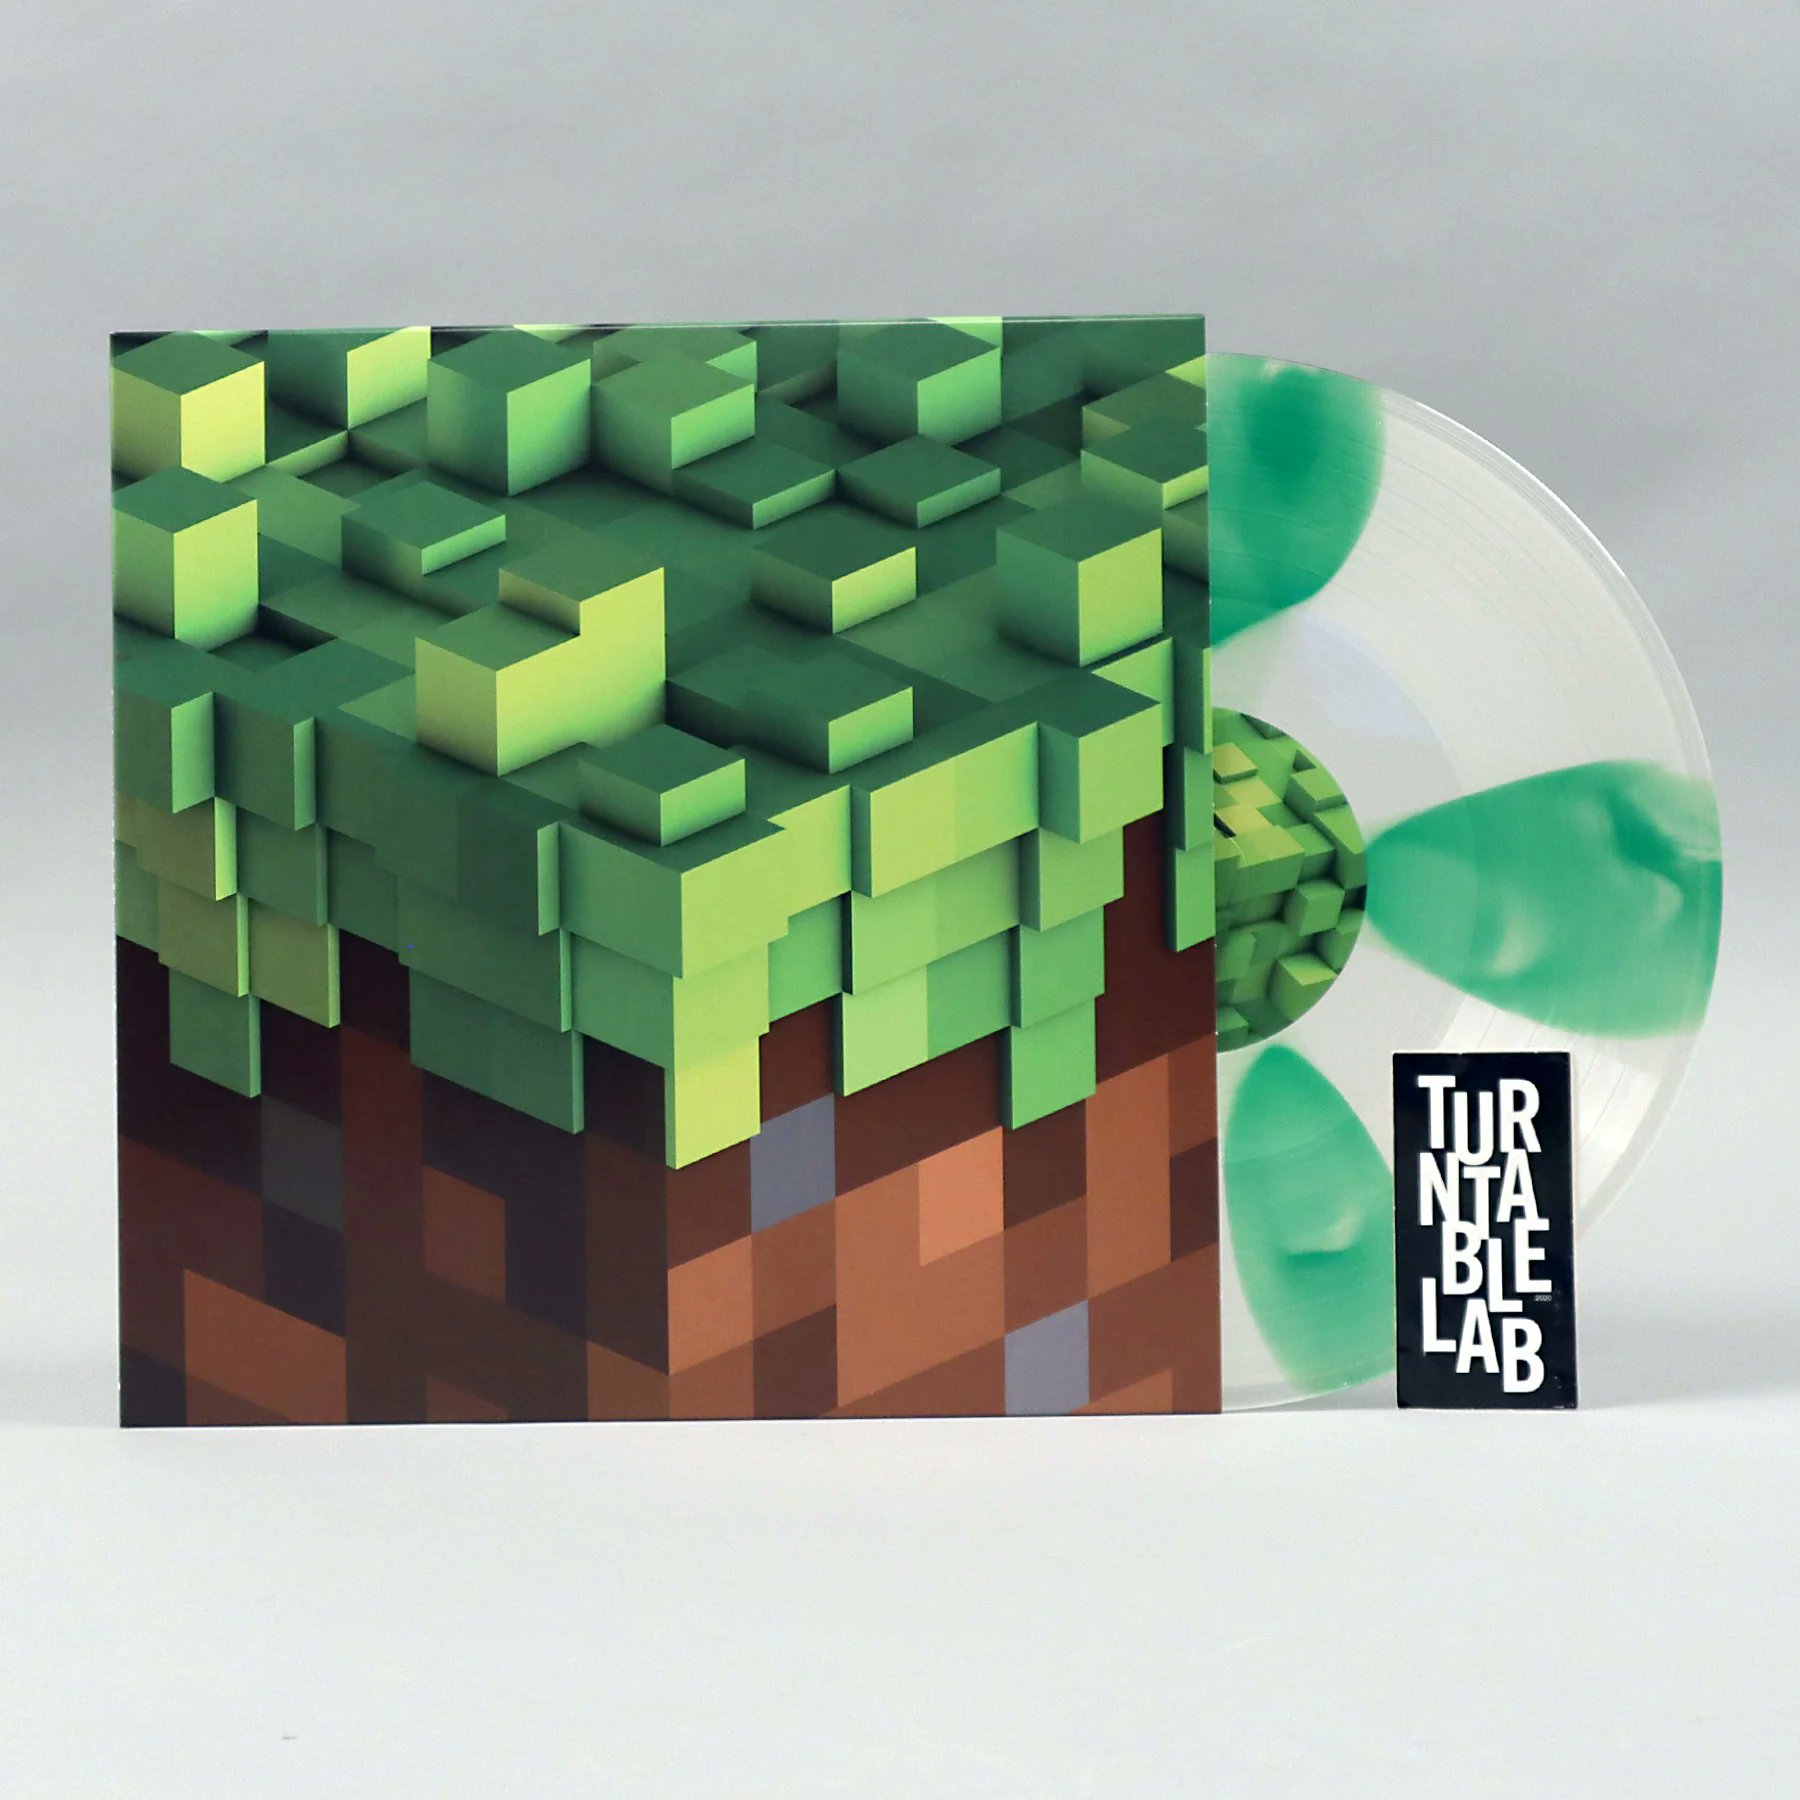 Vinyl on Sale on Twitter: "C418 Minecraft Volume Alpha (Turntable Lab Exclusive Green Cornetto Colored Vinyl, Limited to /2000) $29.95 - https://t.co/3NYwU2lGgG" / Twitter